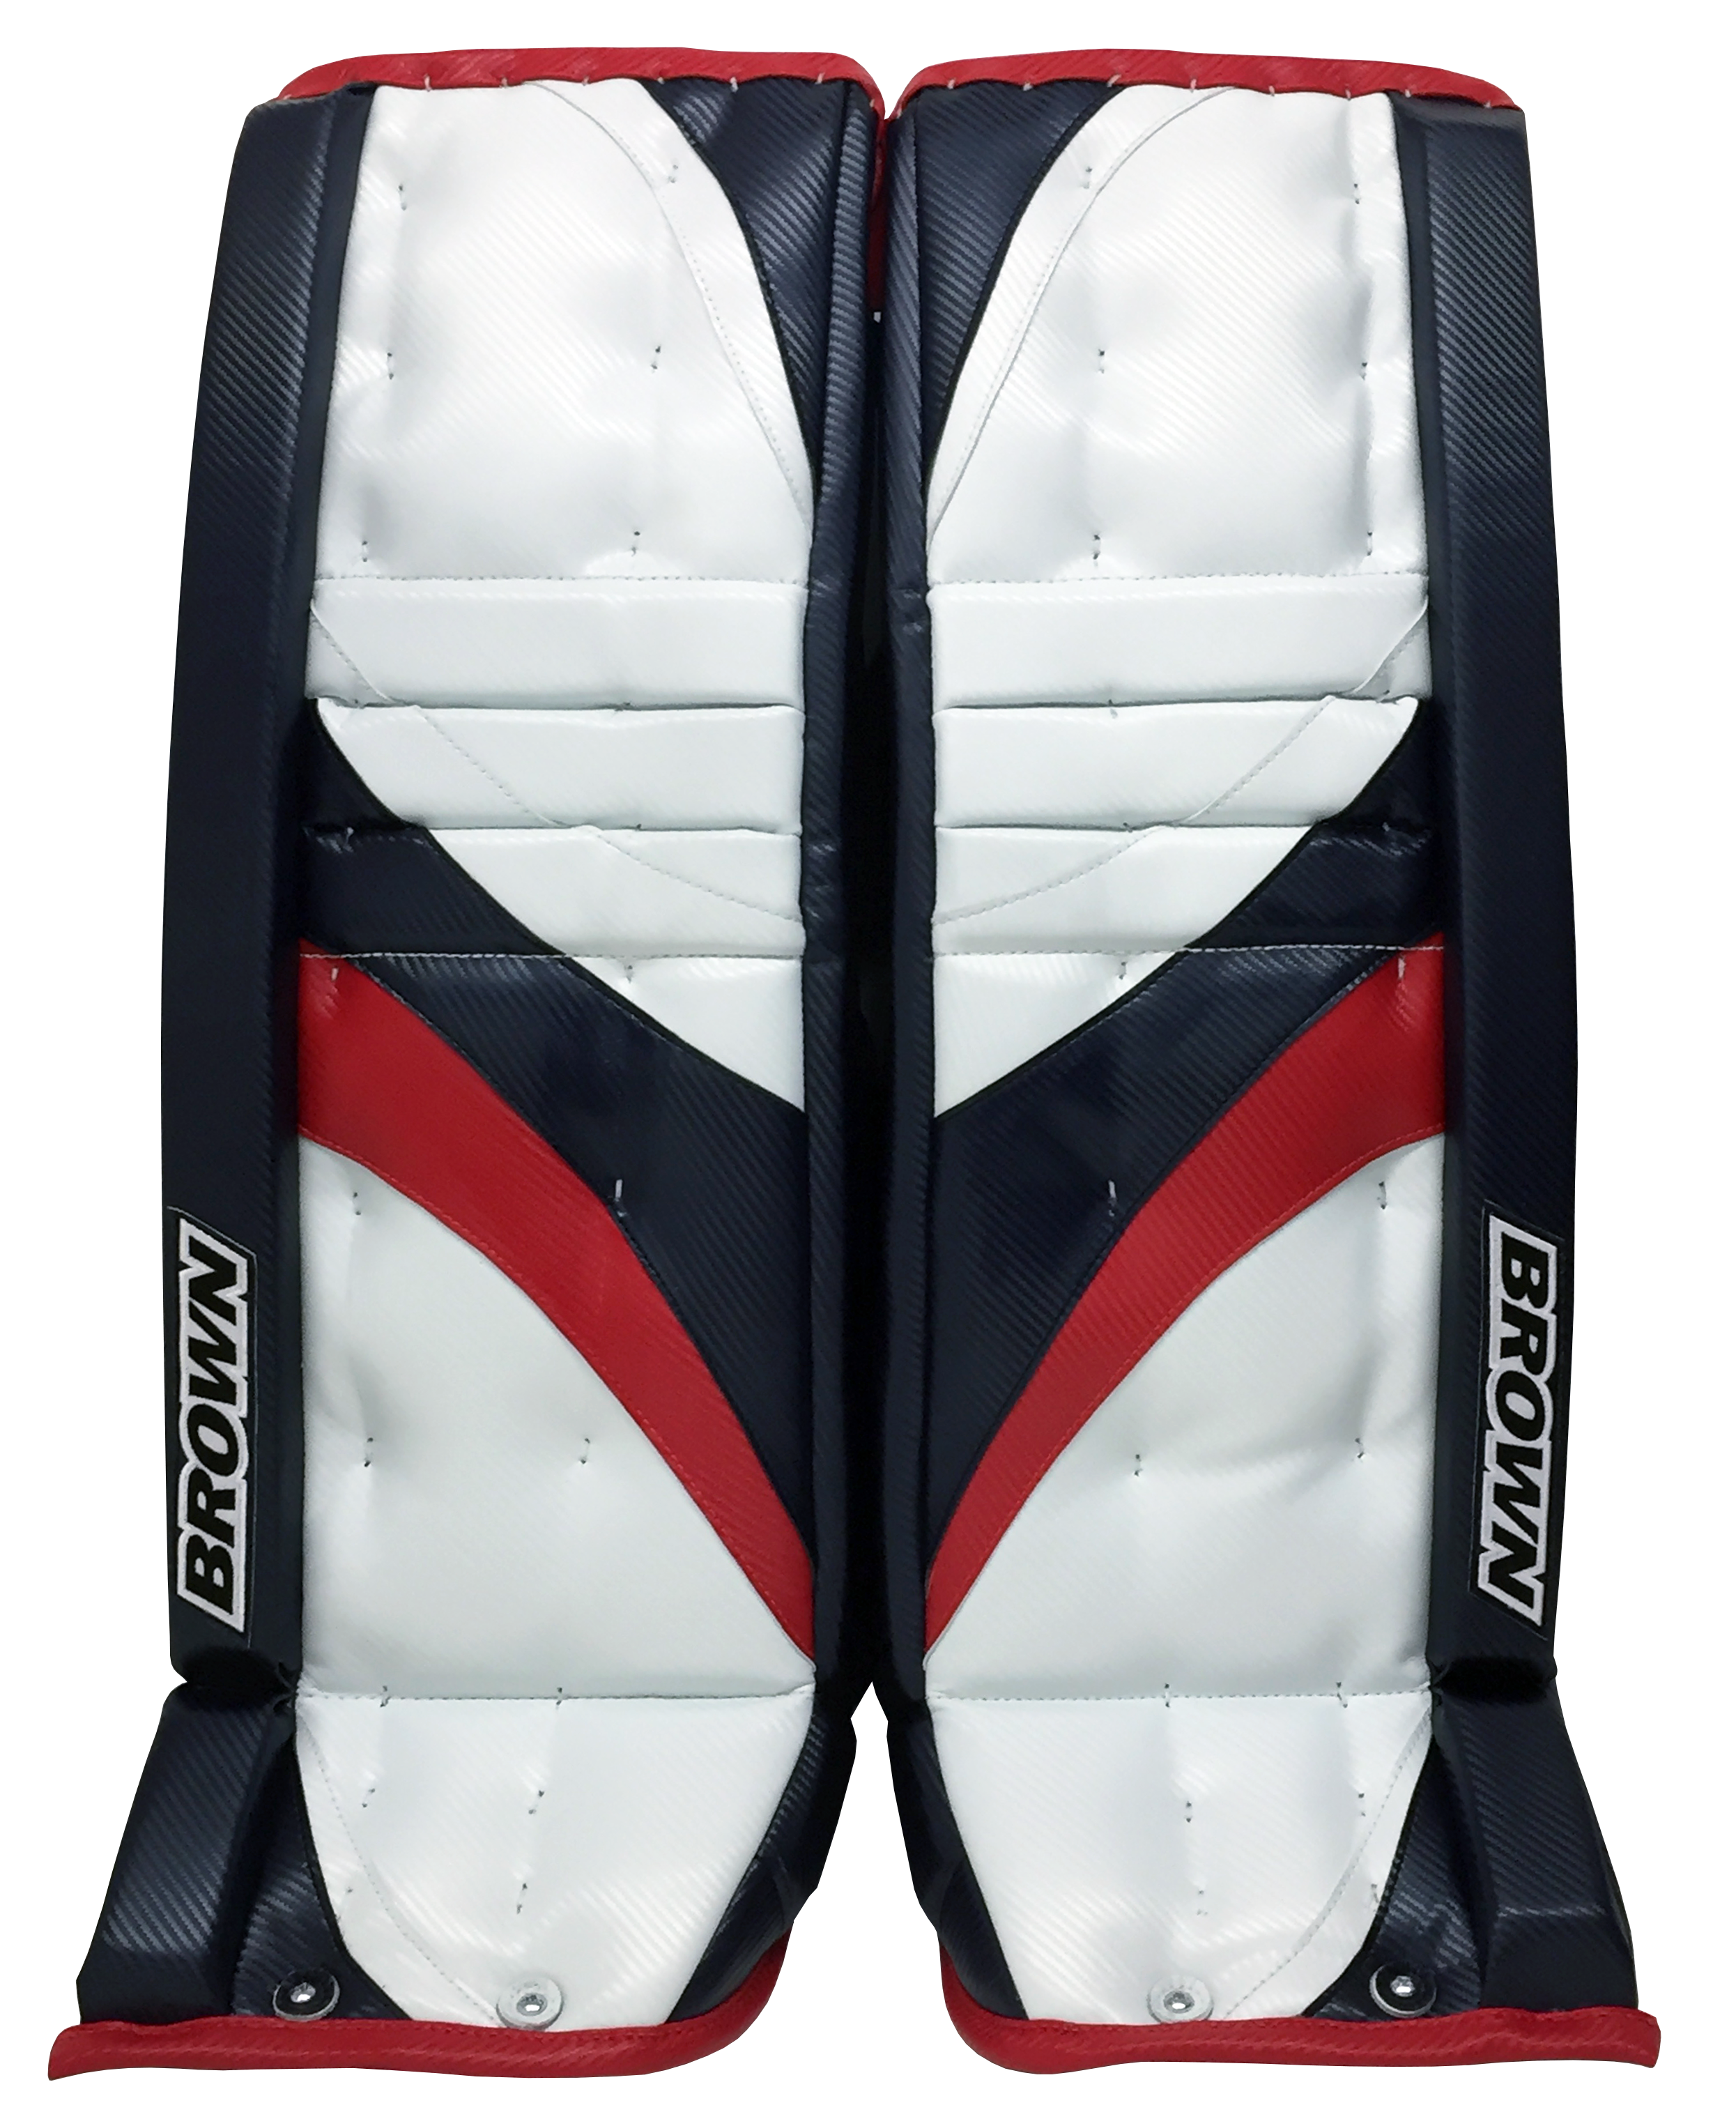 White, blue and red 2500 leg pad